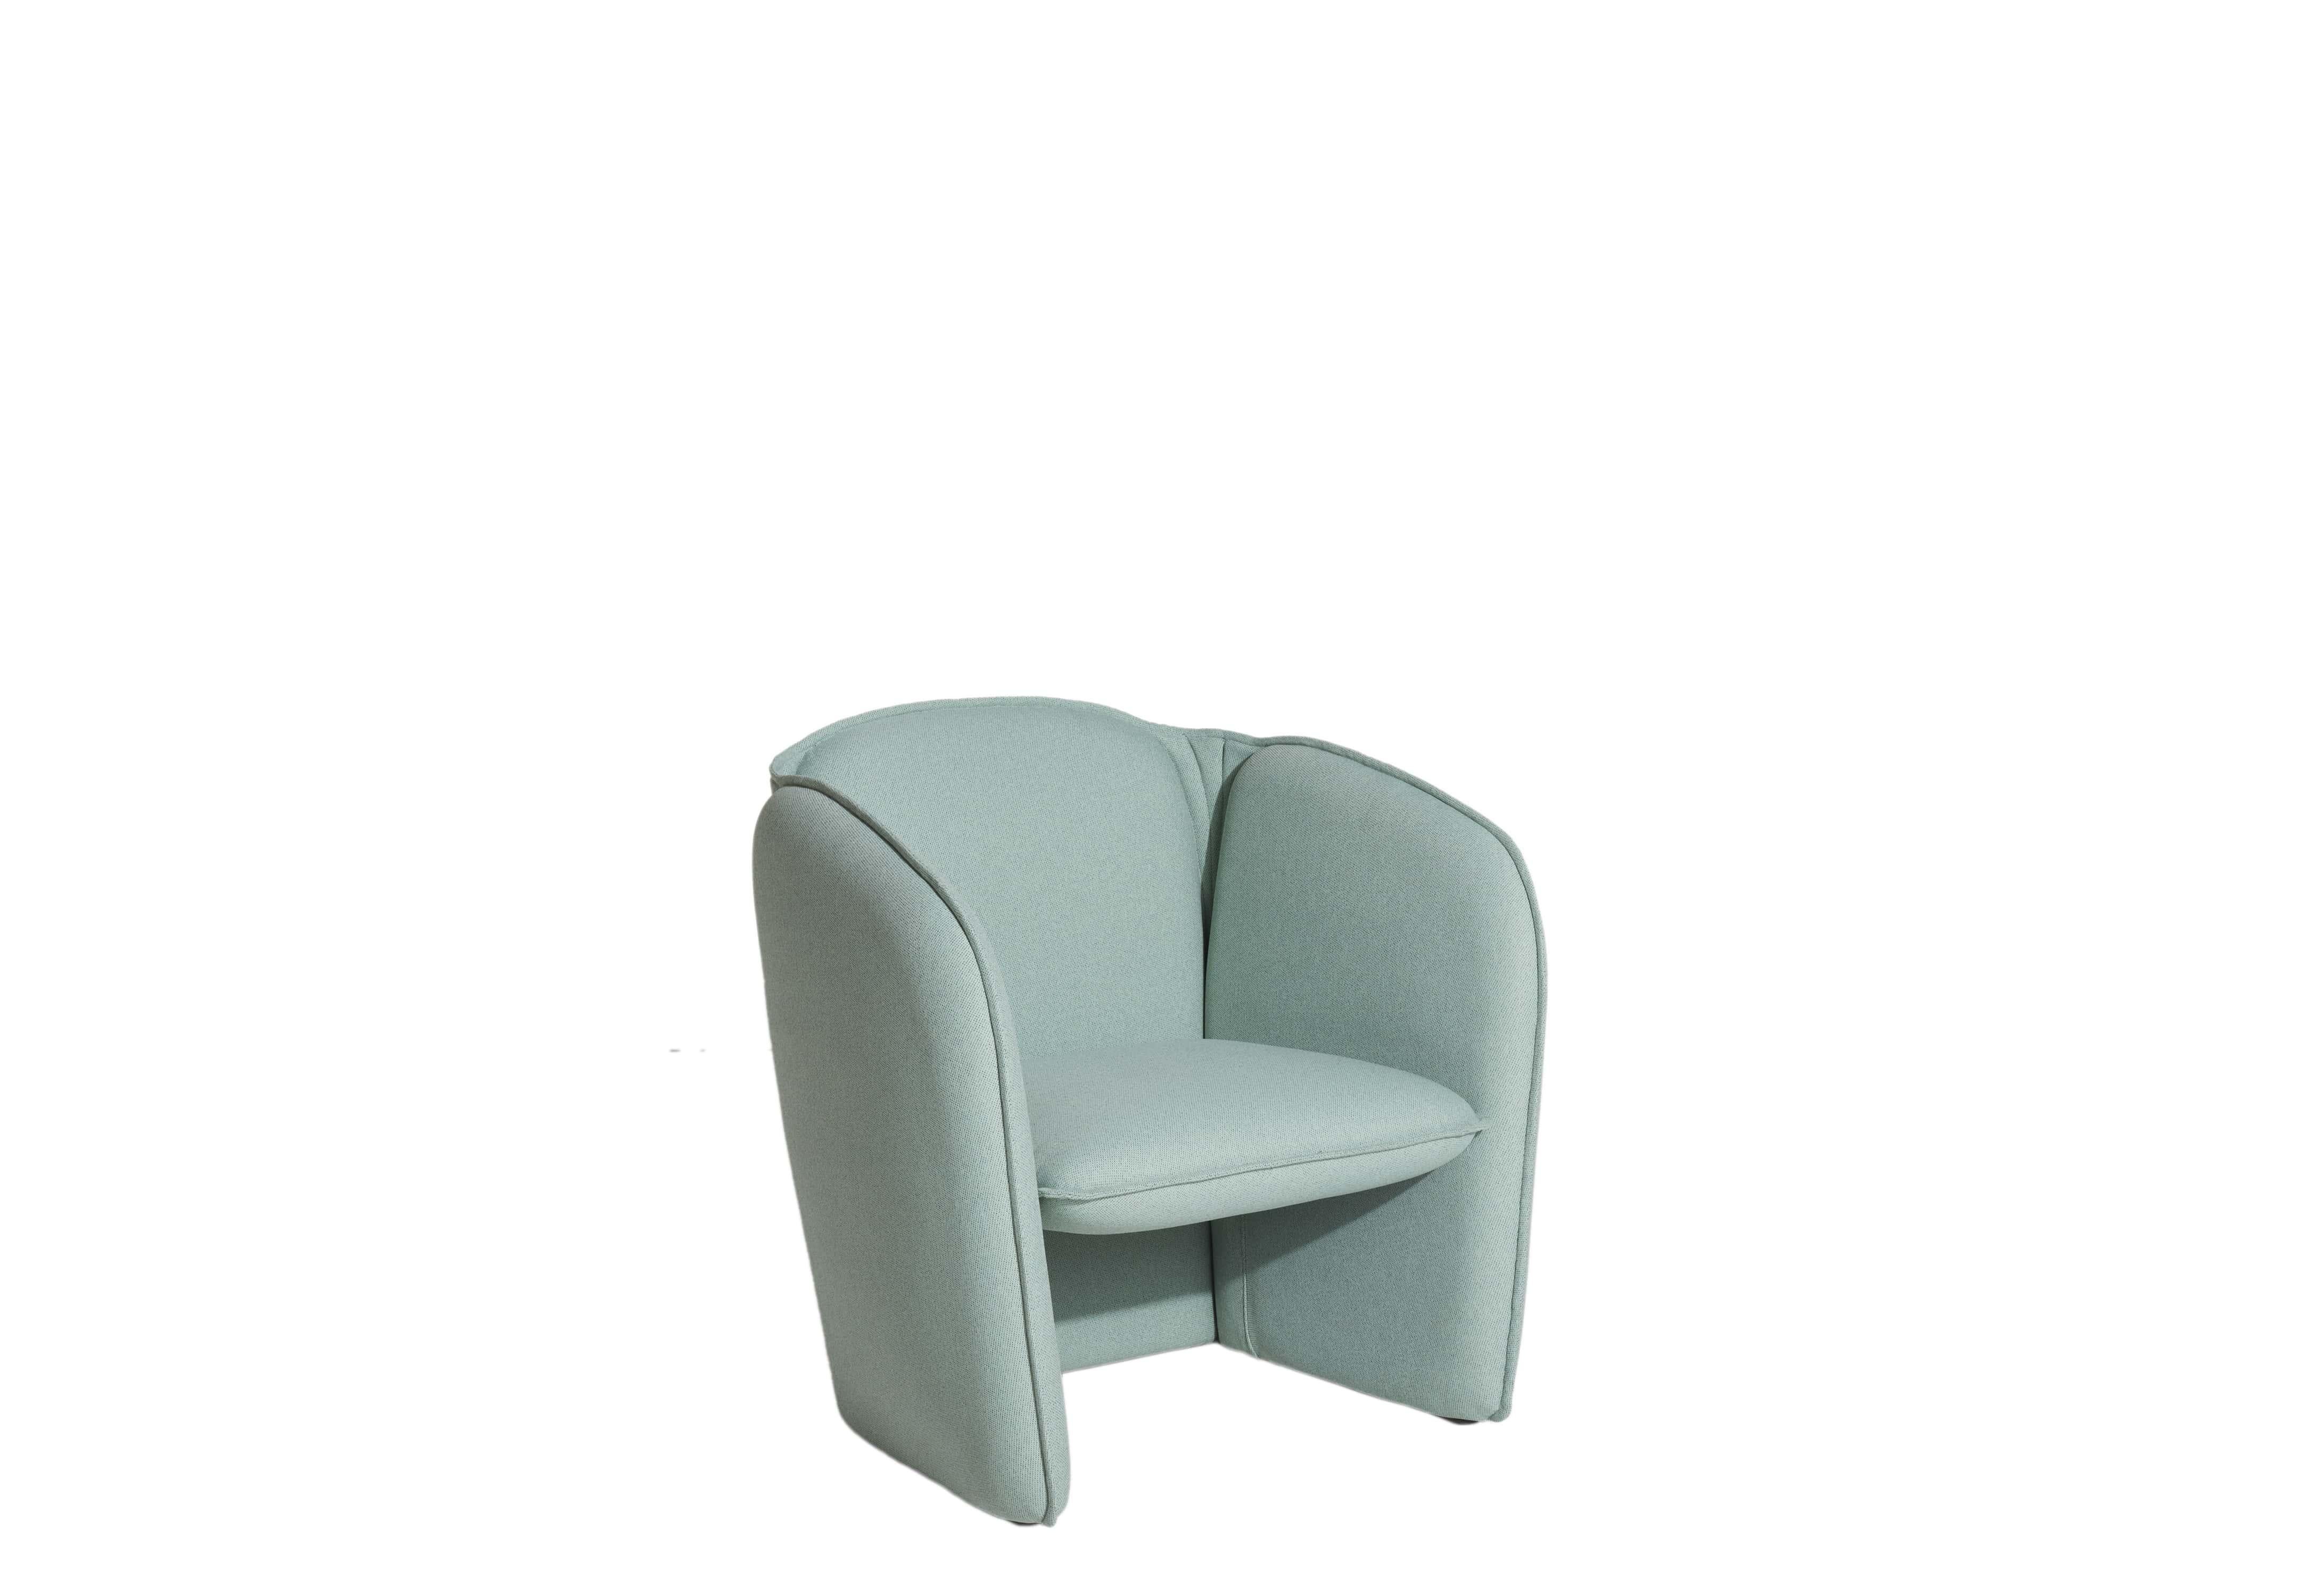 Petite Friture Lily Armchair in Light Blue by Färg & Blanche, 2022

A comprehensive collection comprising a sofa and armchair. With impeccable, concise proportions, and smooth and organic contours for a hospitable feel.

Established in Stockholm